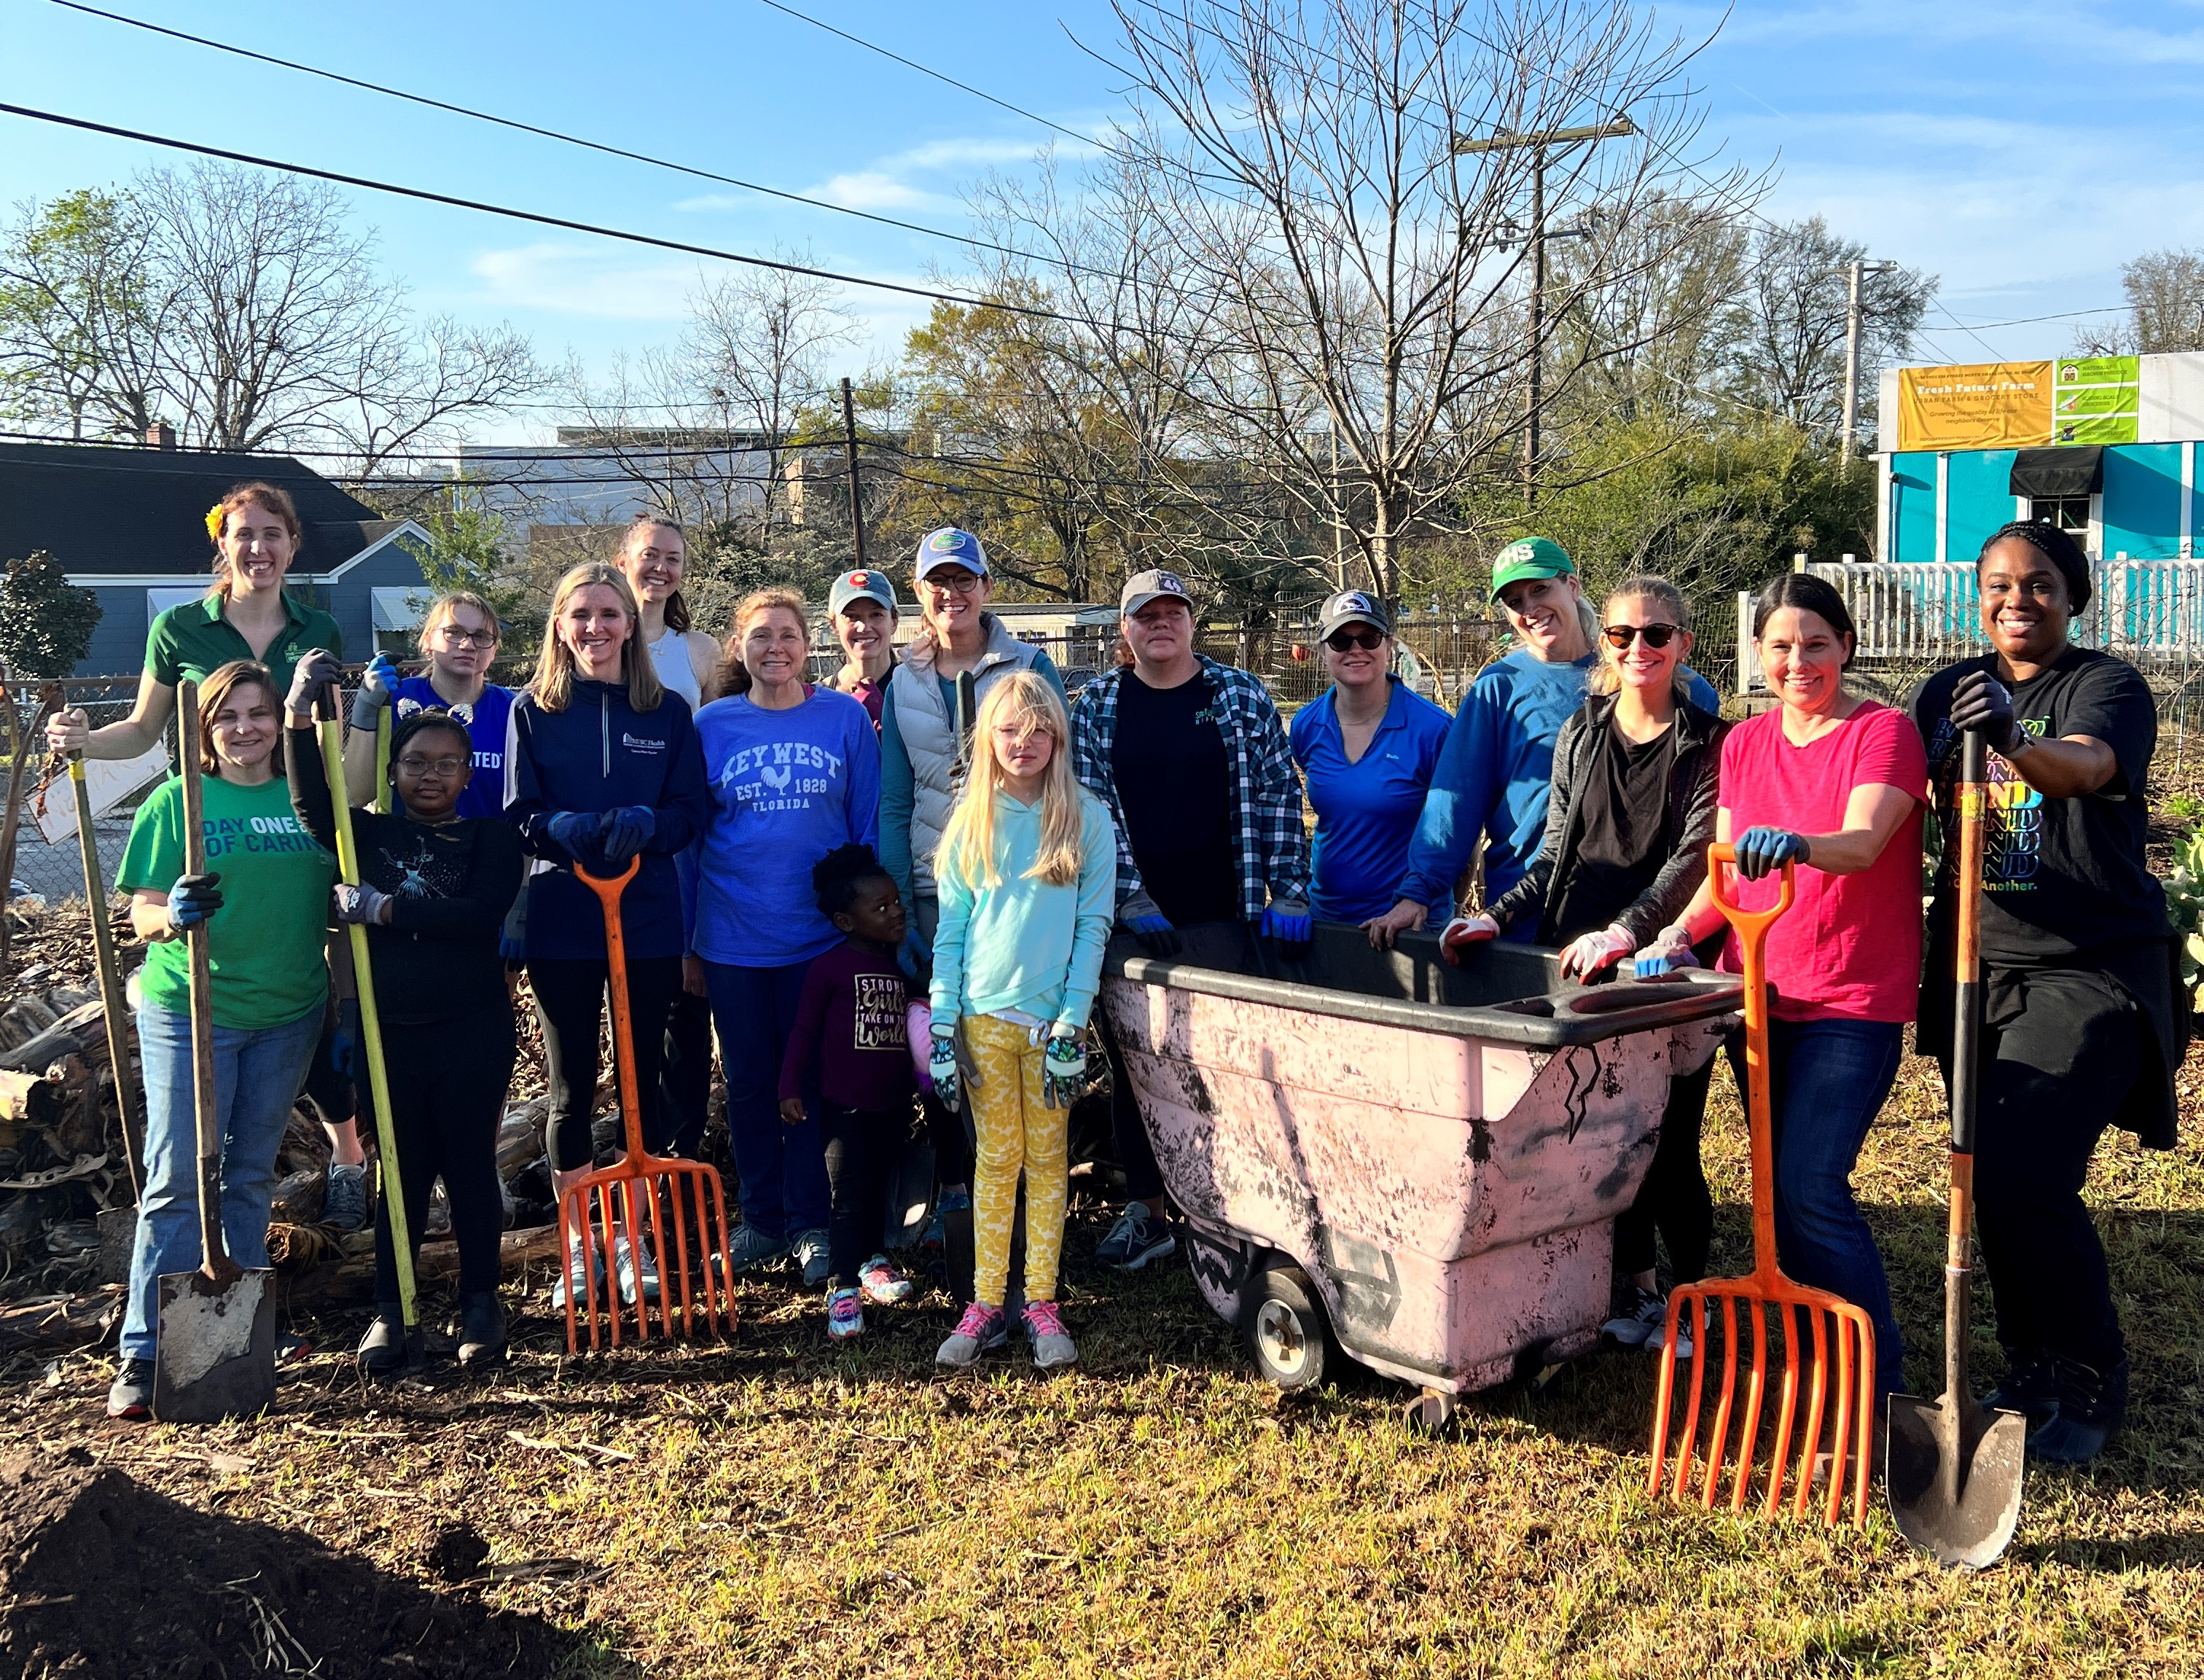 "A large group of volunteers stands outside on a field and smiles, many holding rakes or shovels."